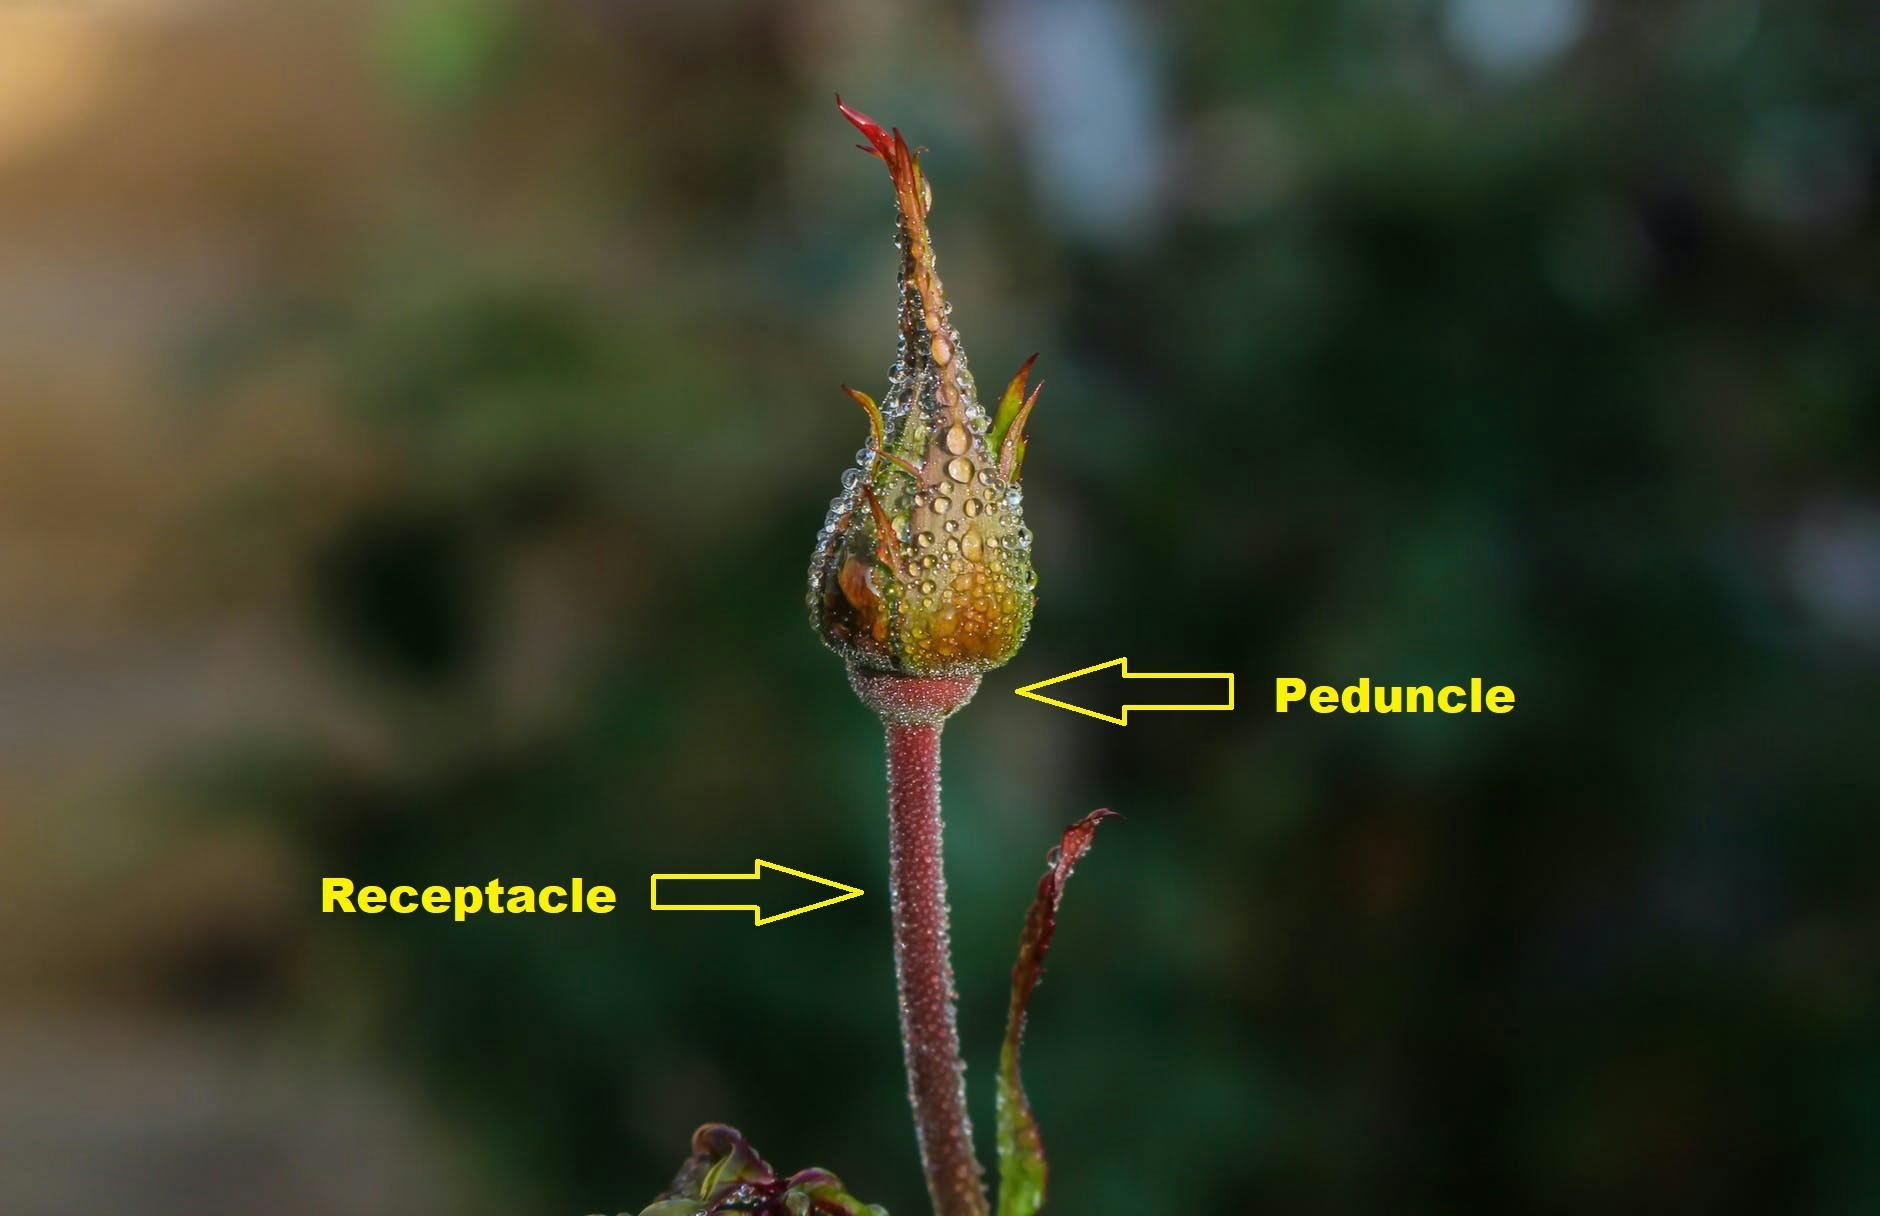 The Peduncle and Receptacle of a rose flower